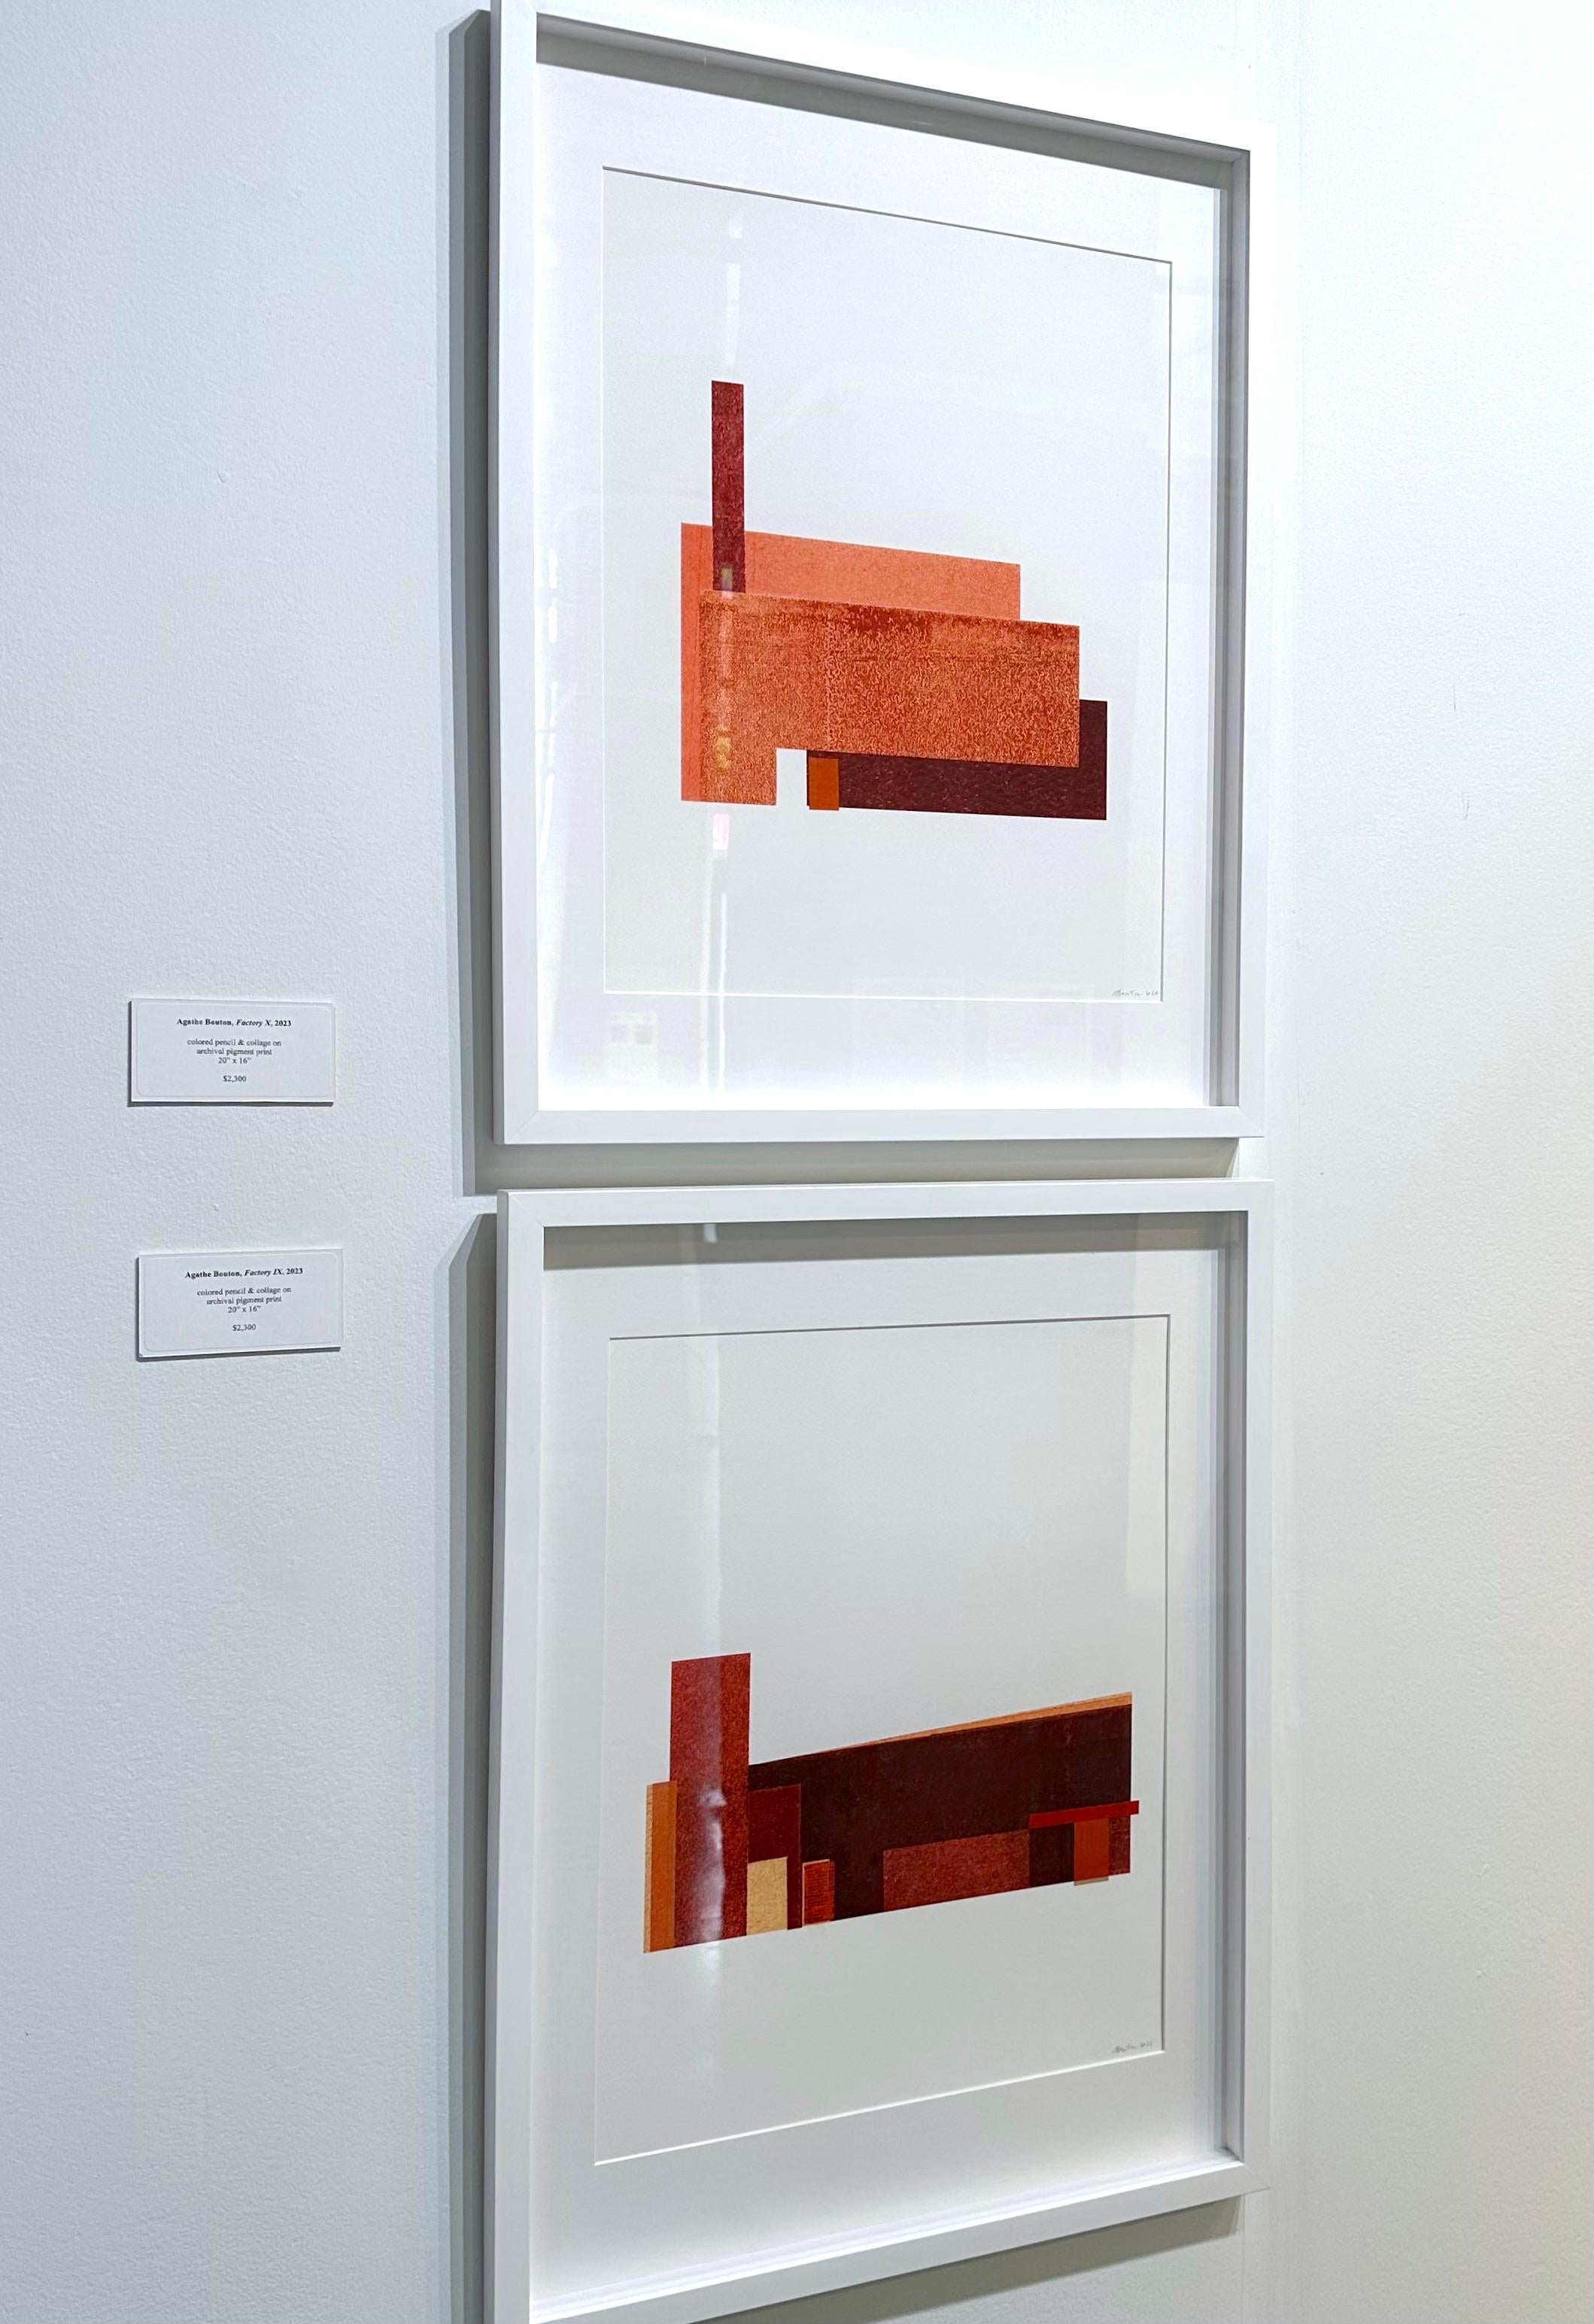 Factory IX: modernist urban architectural collage on monoprint in red, framed - Contemporary Art by Agathe Bouton